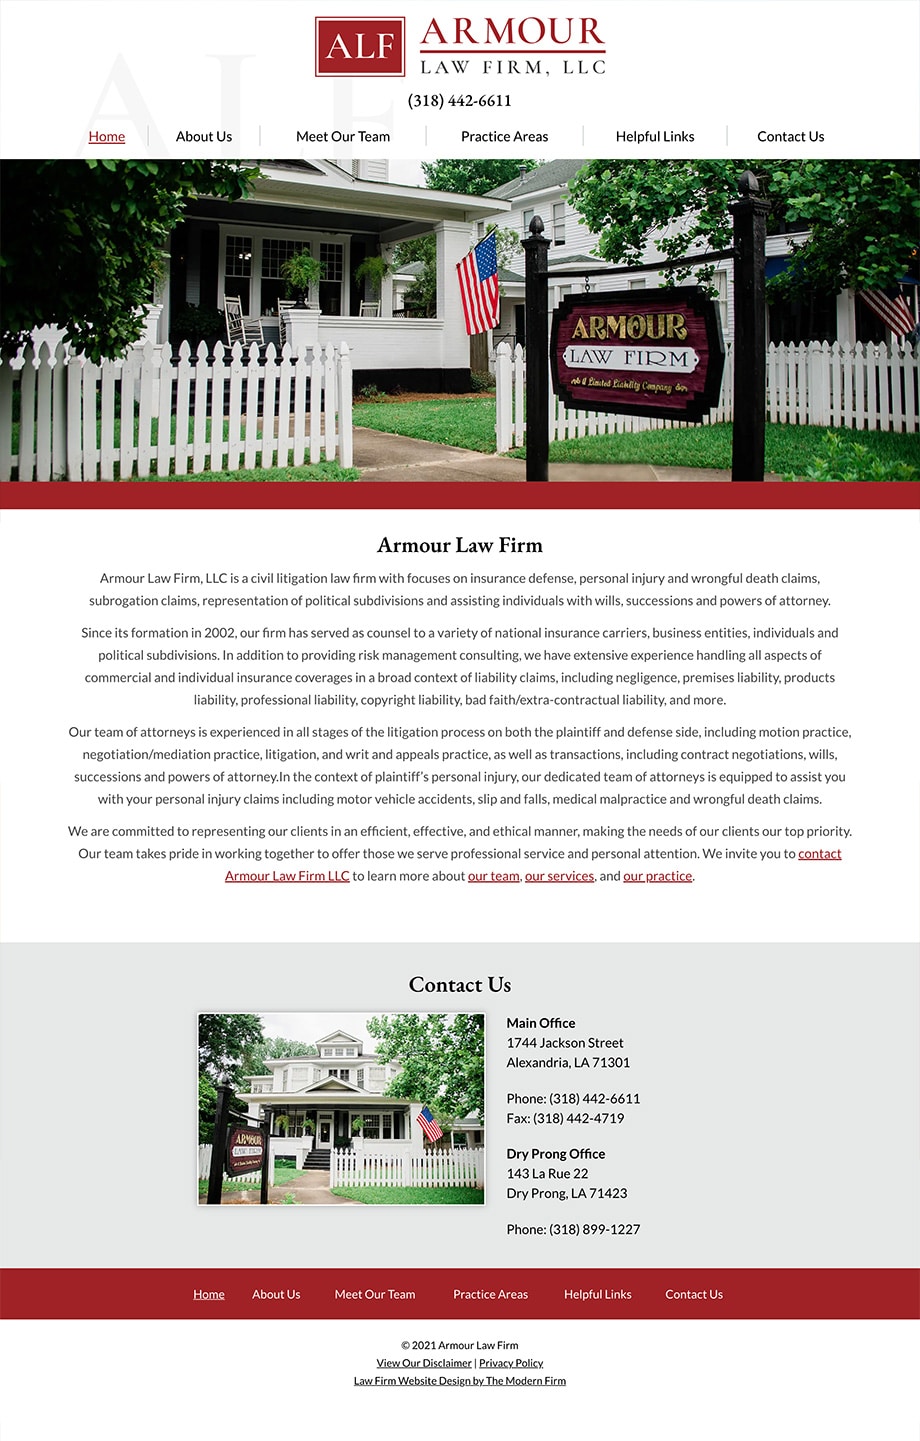 Law Firm Website Design for Armour Law Firm